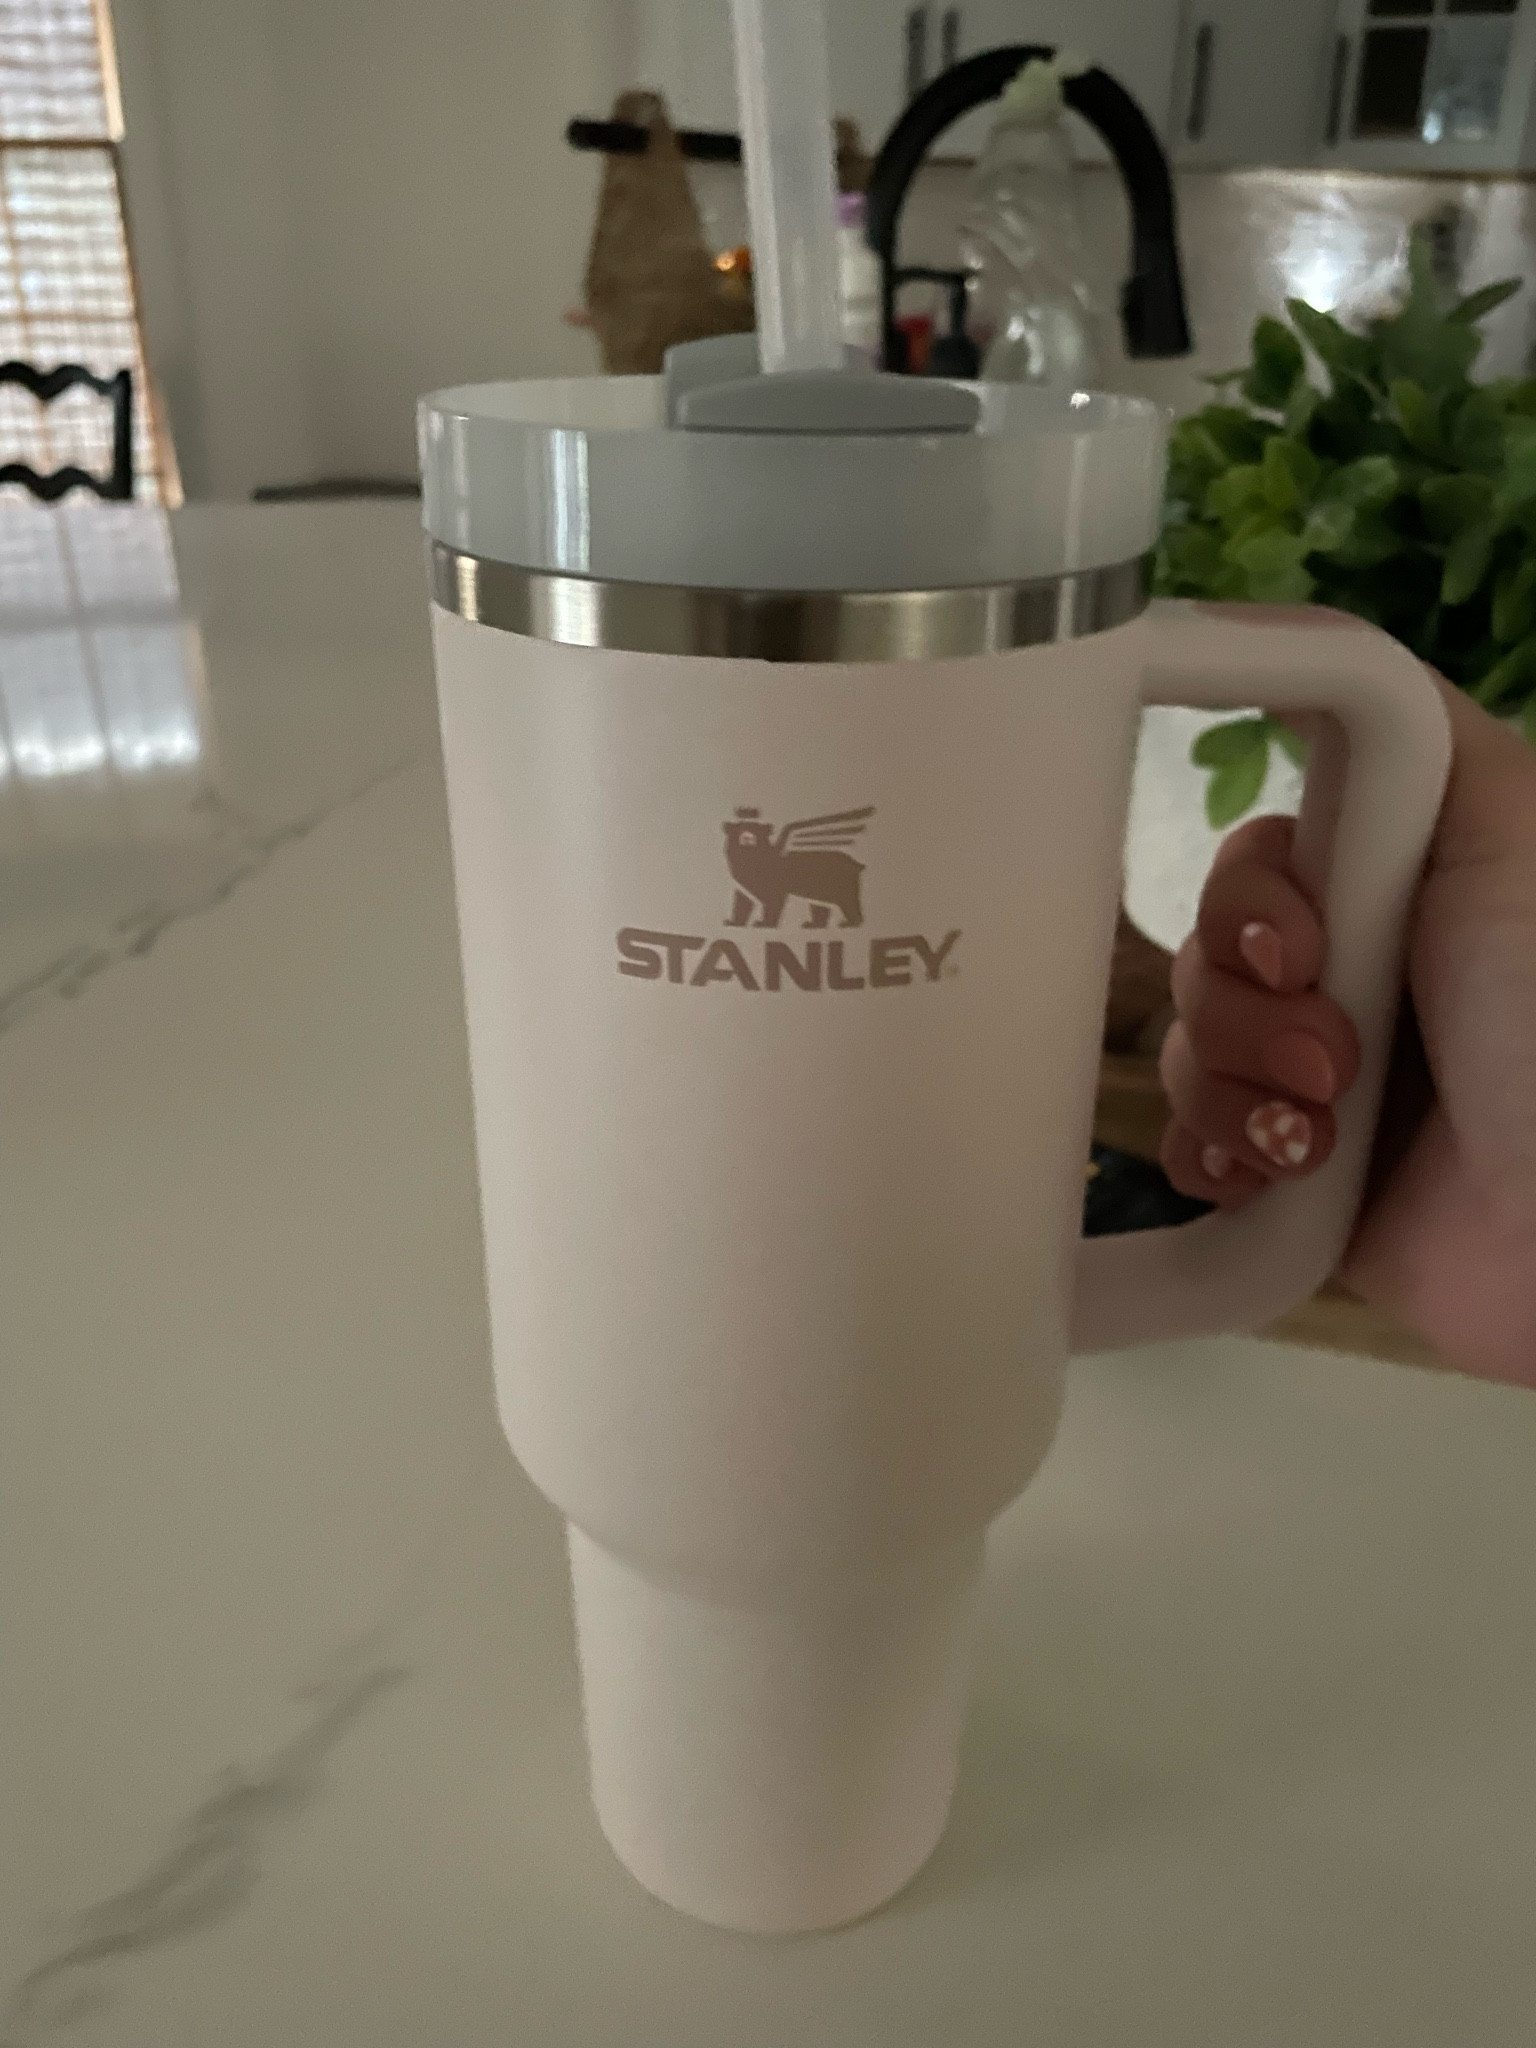 Stanley Flowstate Quencher H2.0 … curated on LTK